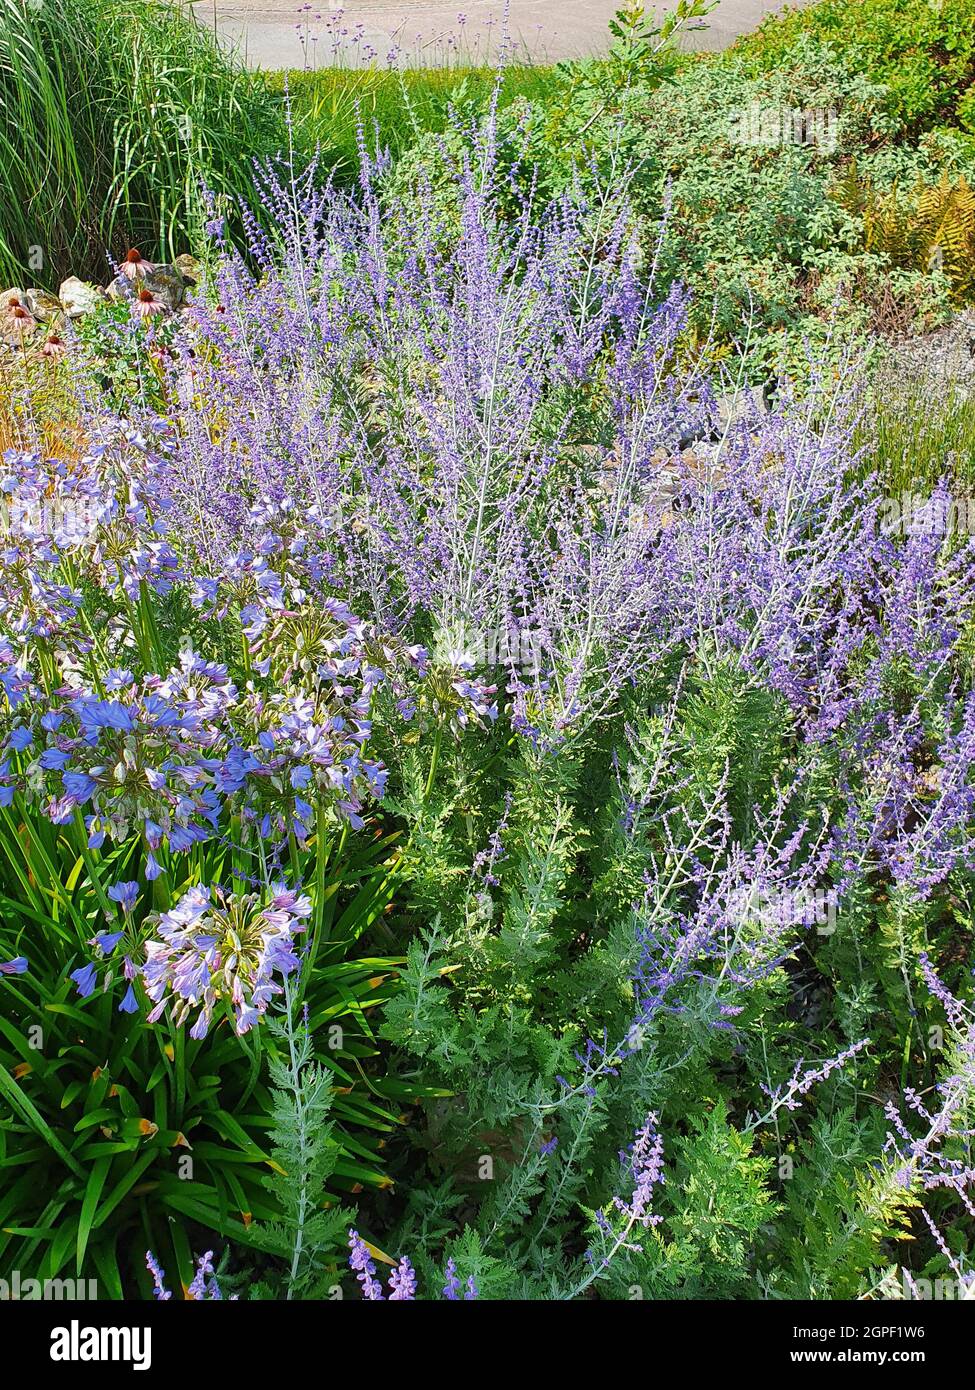 Perovskia 'Blue Spire' a late summer flowering plant with a blue purple summertime flower in July and August and commonly known as Russian Sage, stock Stock Photo